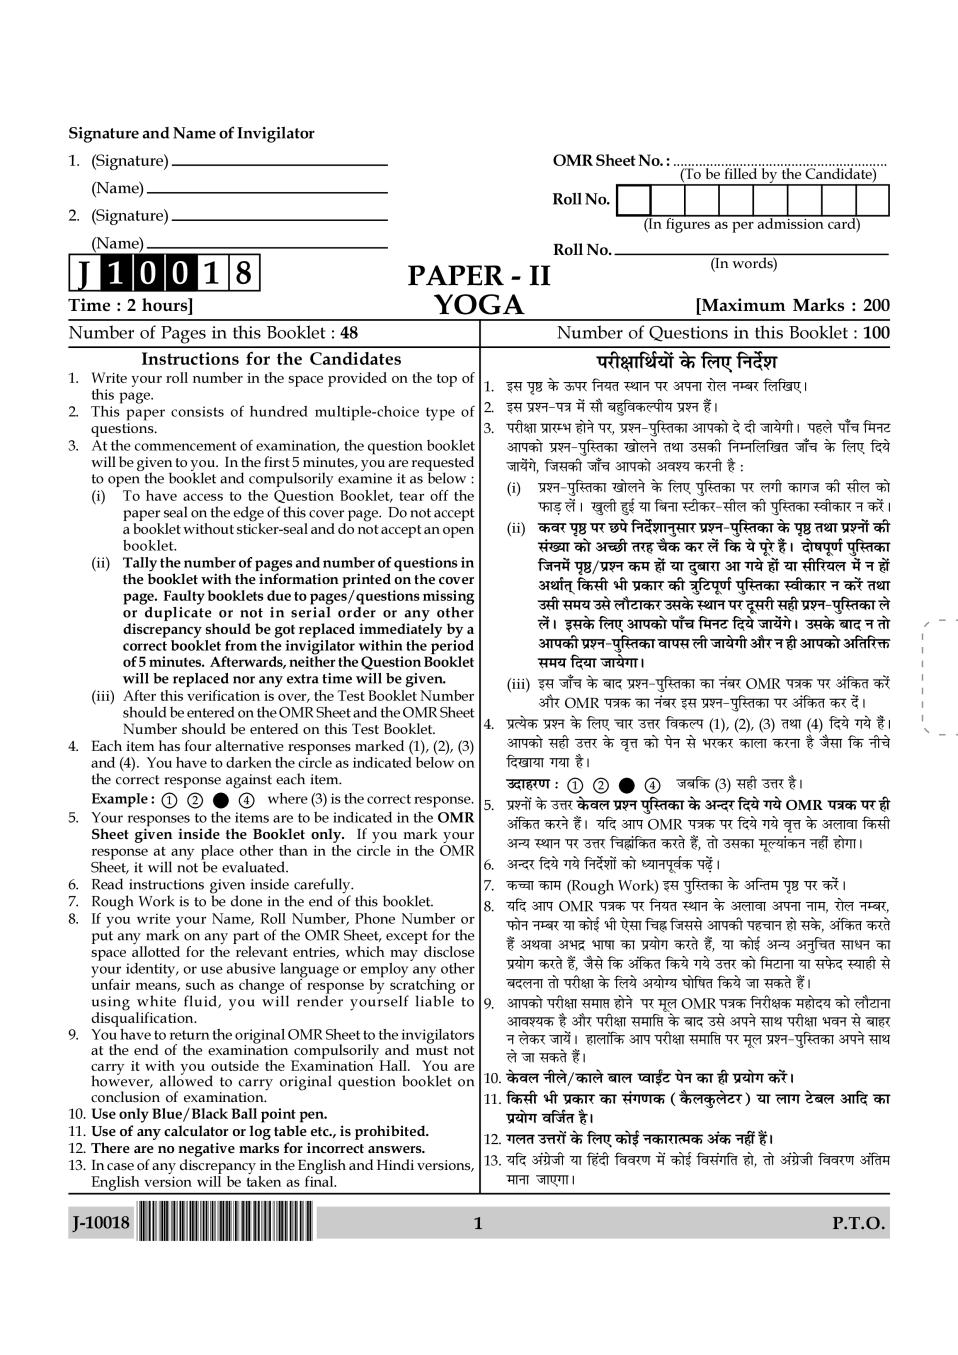 UGC NET Yoga Question Paper 2018 - Page 1